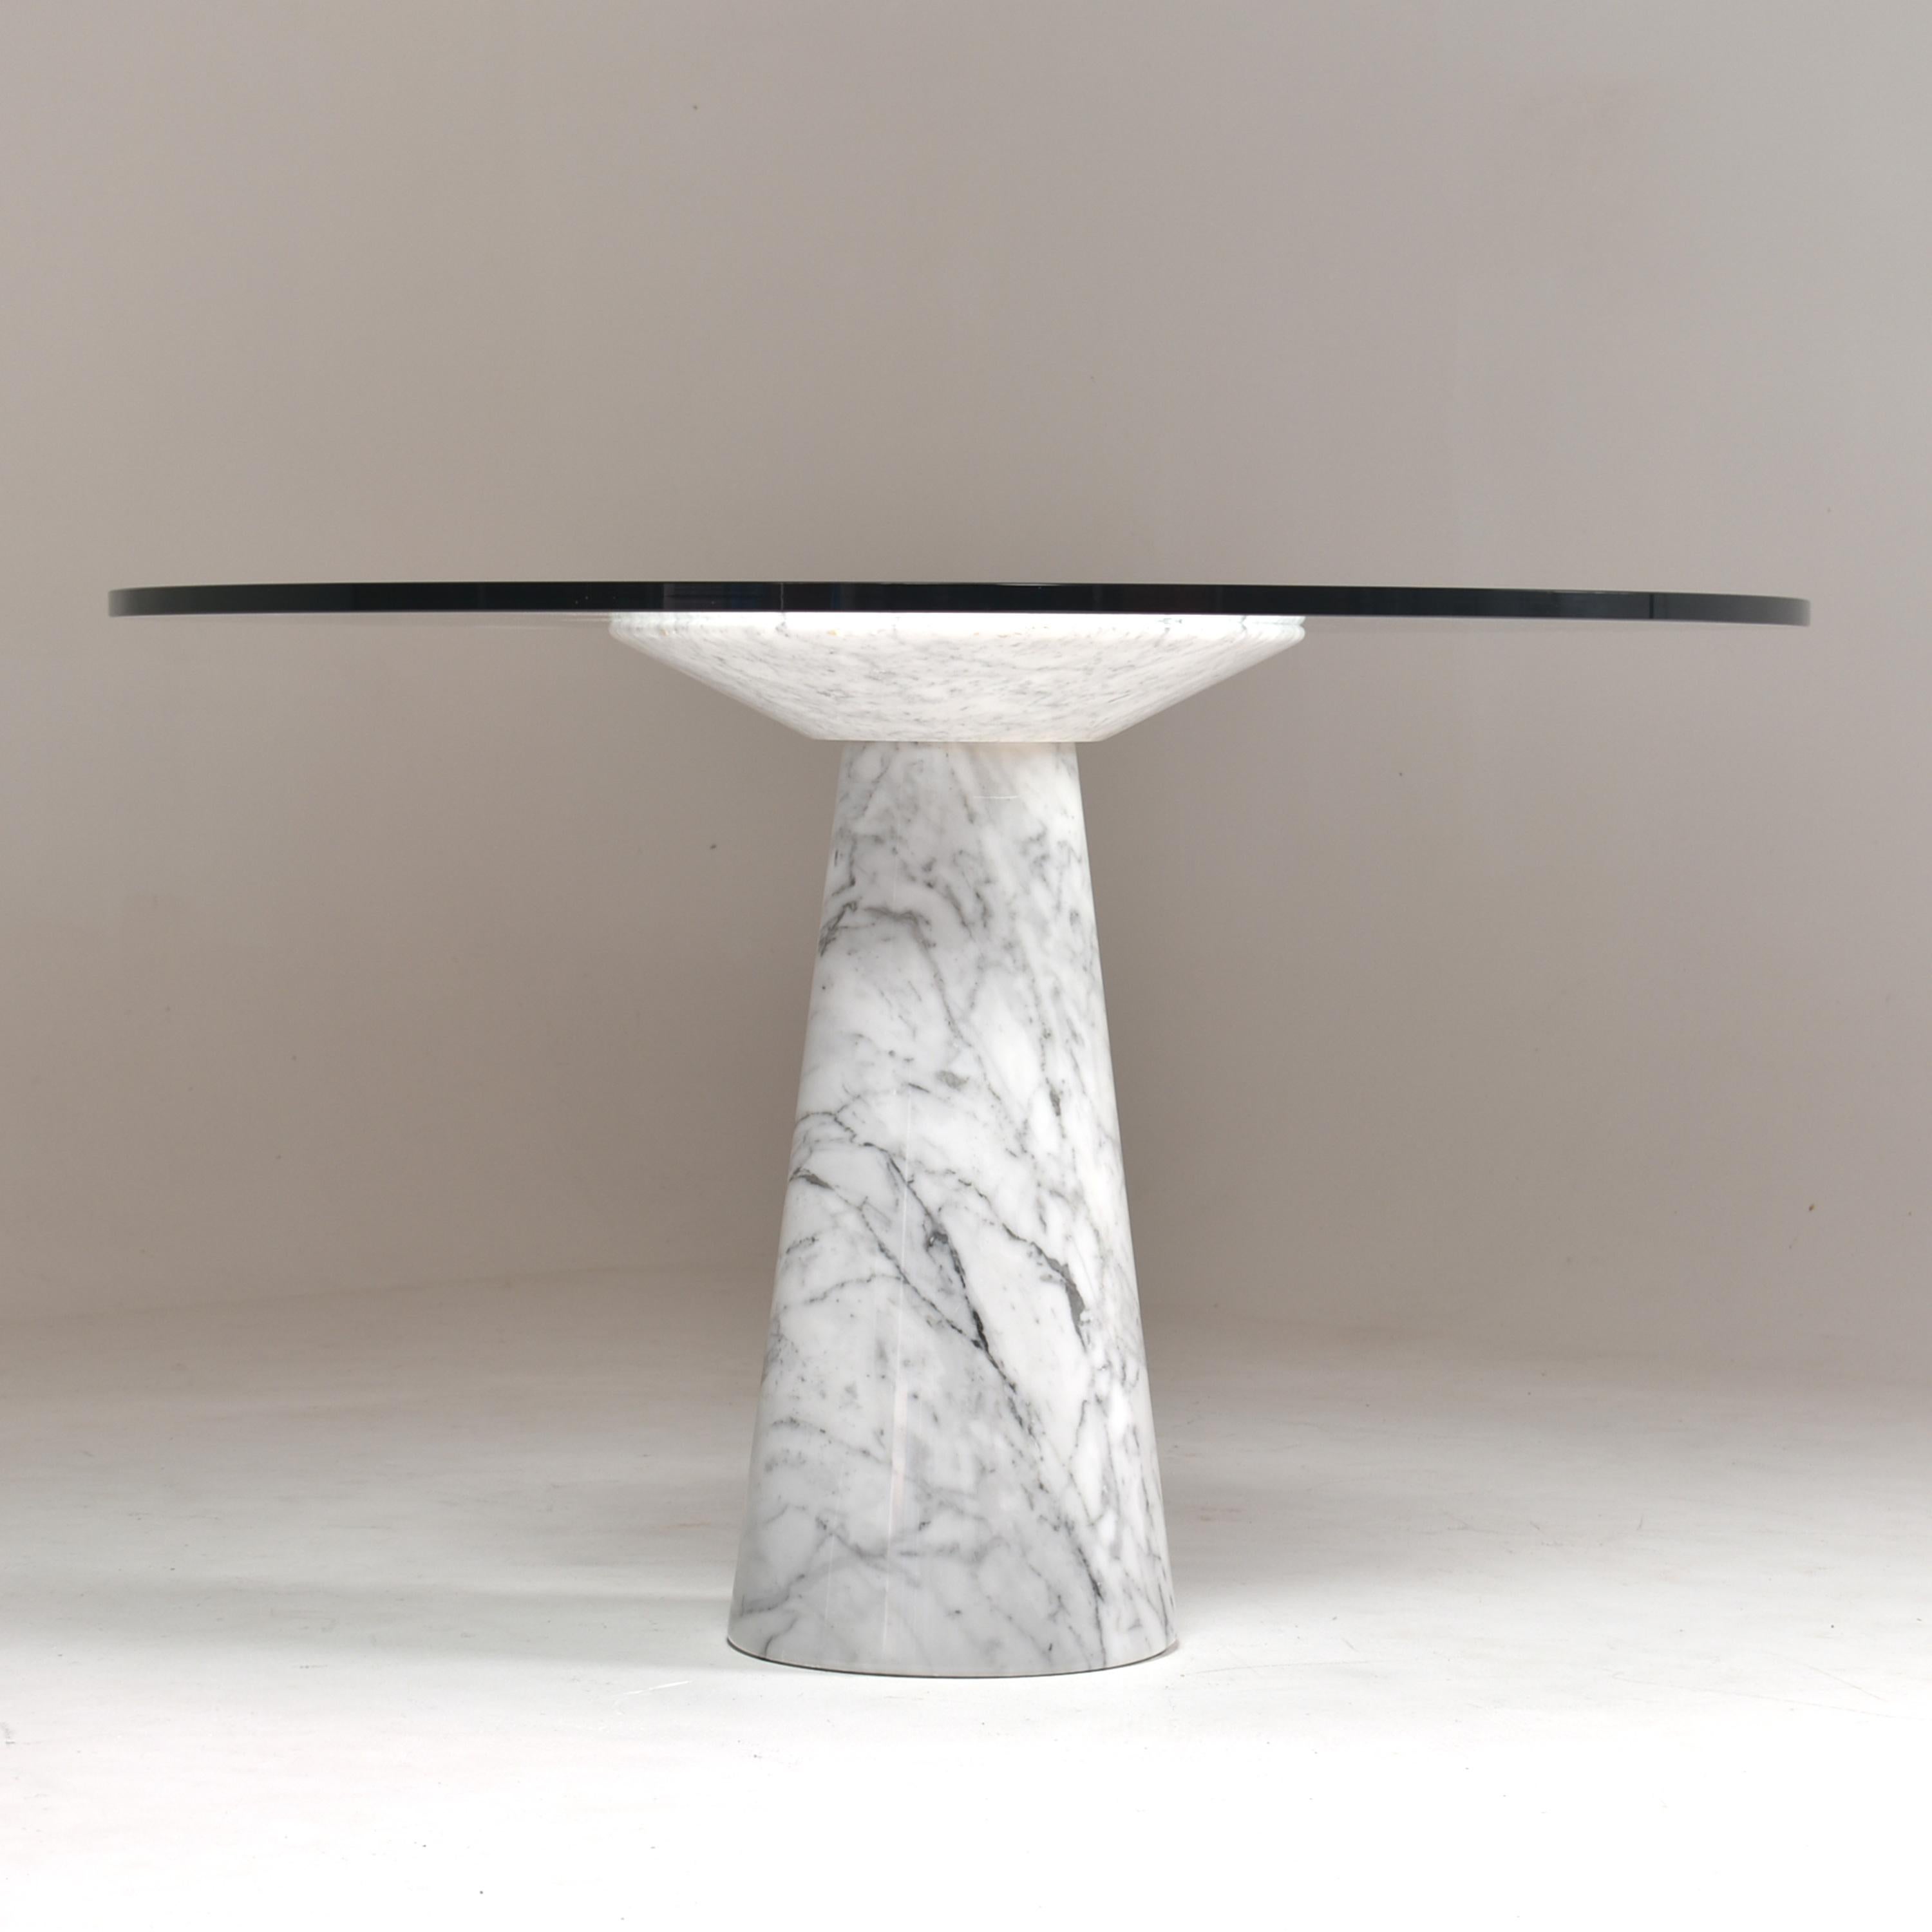 Round pedestal dining table, with a white Carrara marble leg, and round thick glass top.
In this work, the designer put the focus on the architecture of the leg, simple and classical play of volumes.
The glass top just sit on the polished marble,